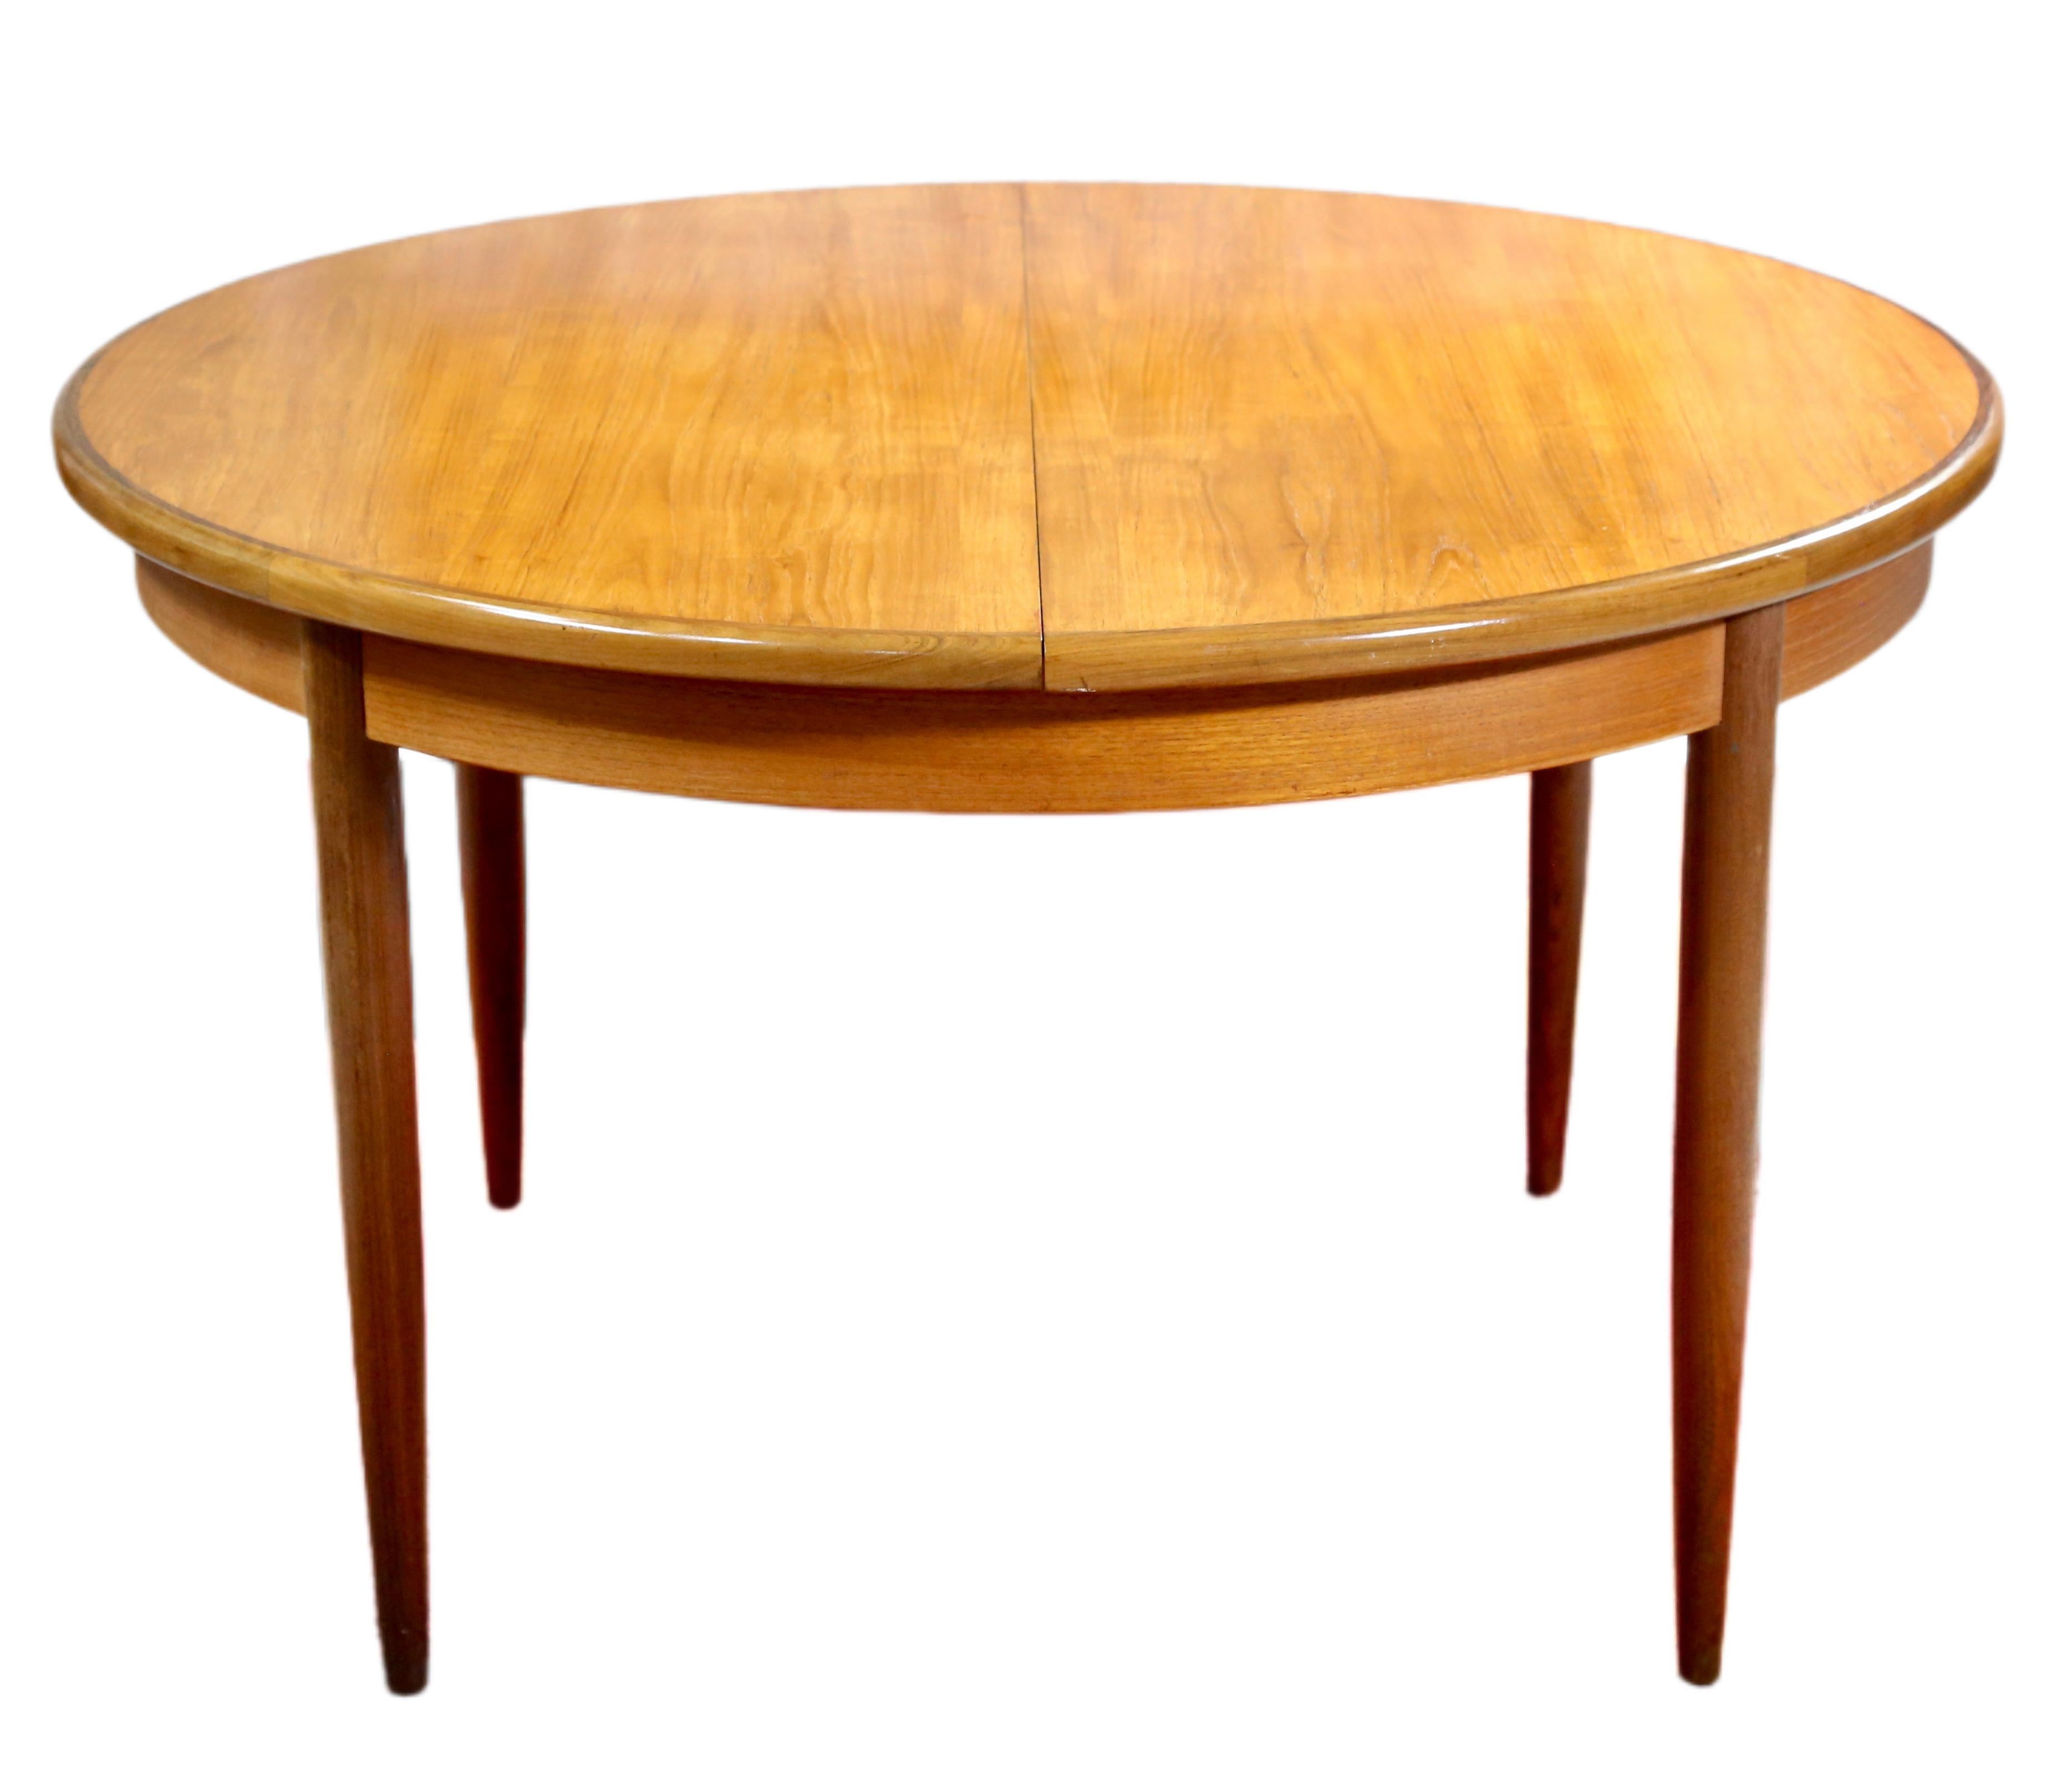 A remarkable Danish style teak dining table designed by VB Wilkins as part of the Fresco range for G Plan. The table features a two panel round top, opening to reveal fold out extension panels, above a round plain frieze, raised on beautifully